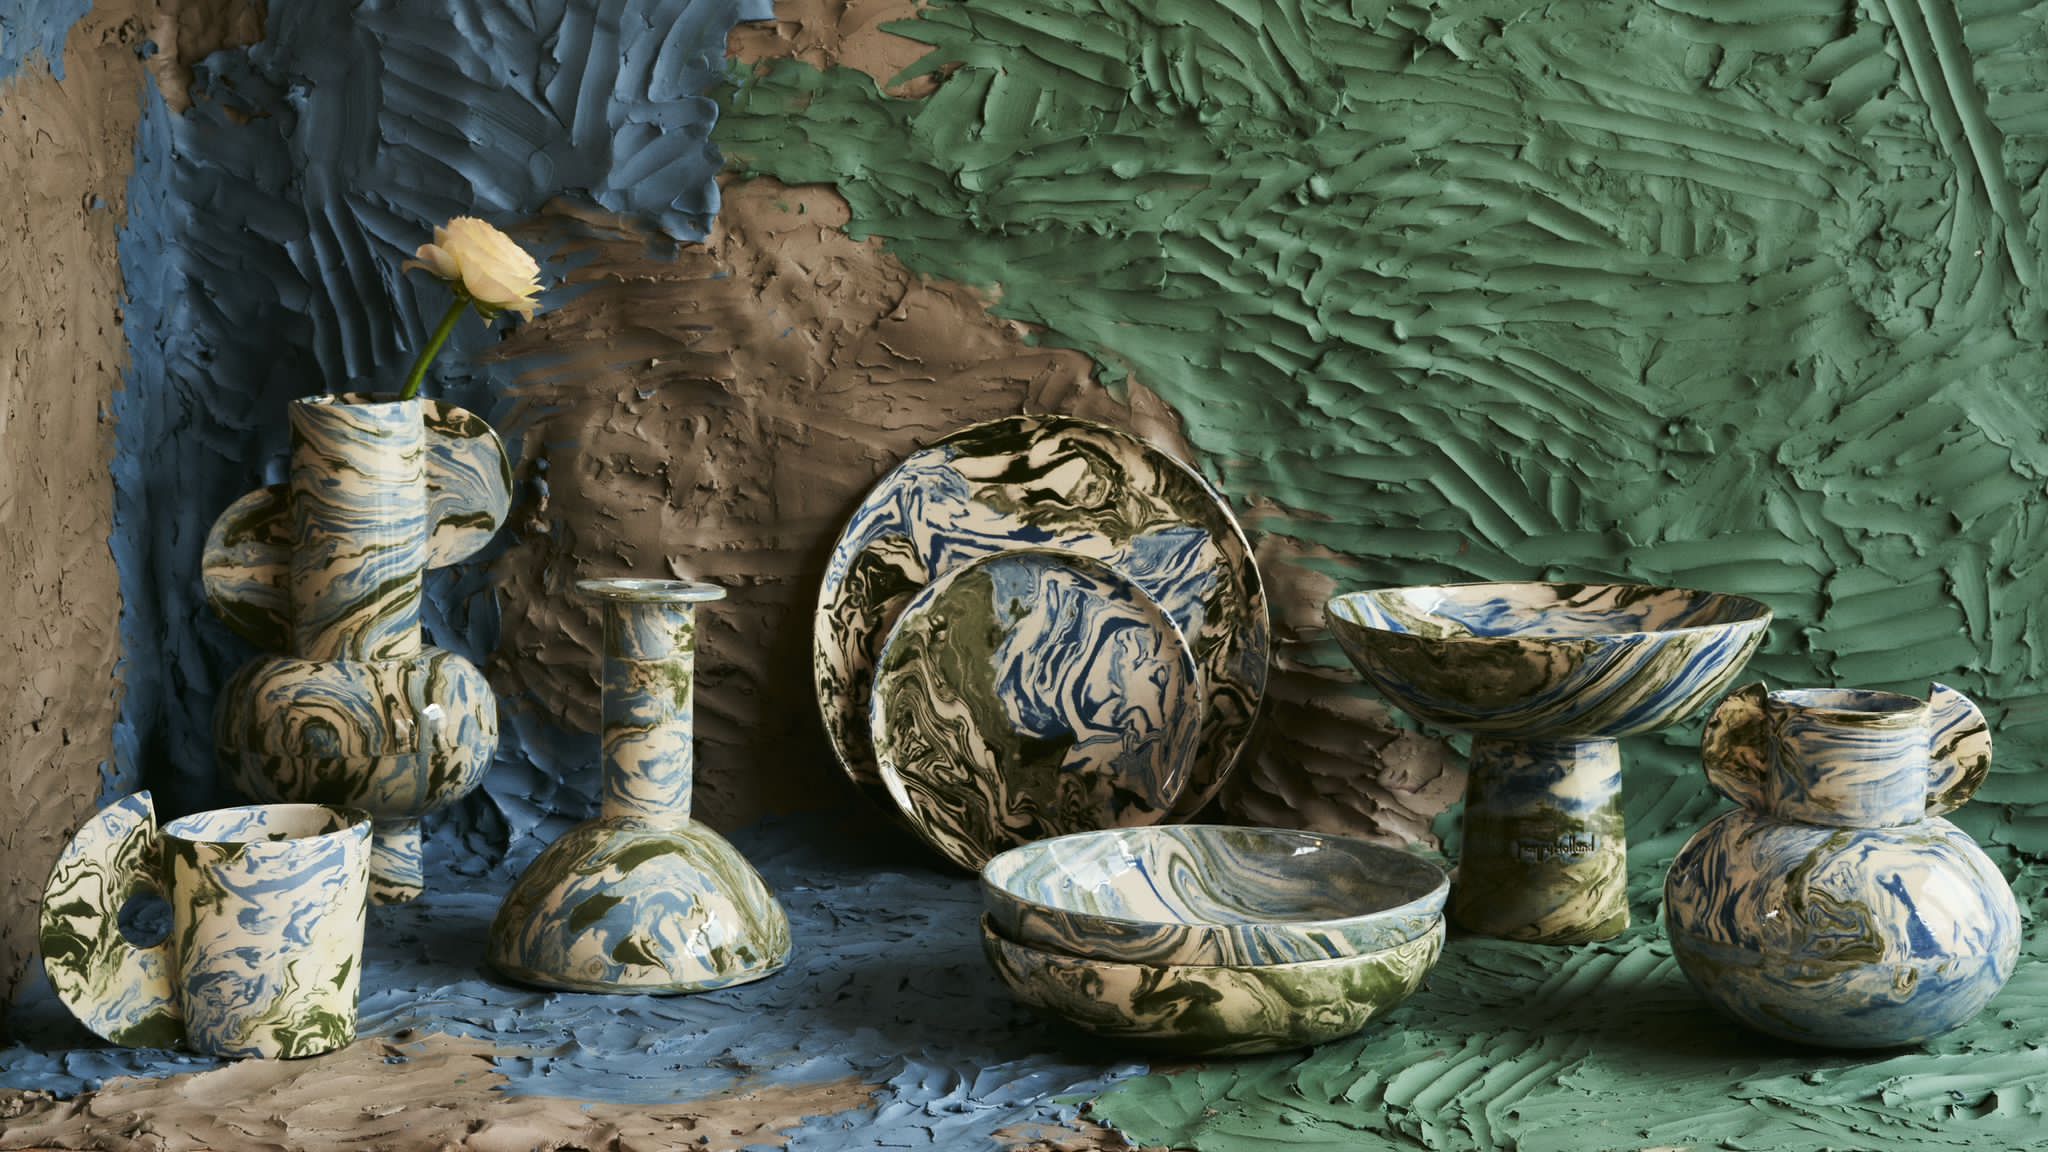 Henry Holland Studio's Space range of ceramics is made from waste materials - Effect Magazine